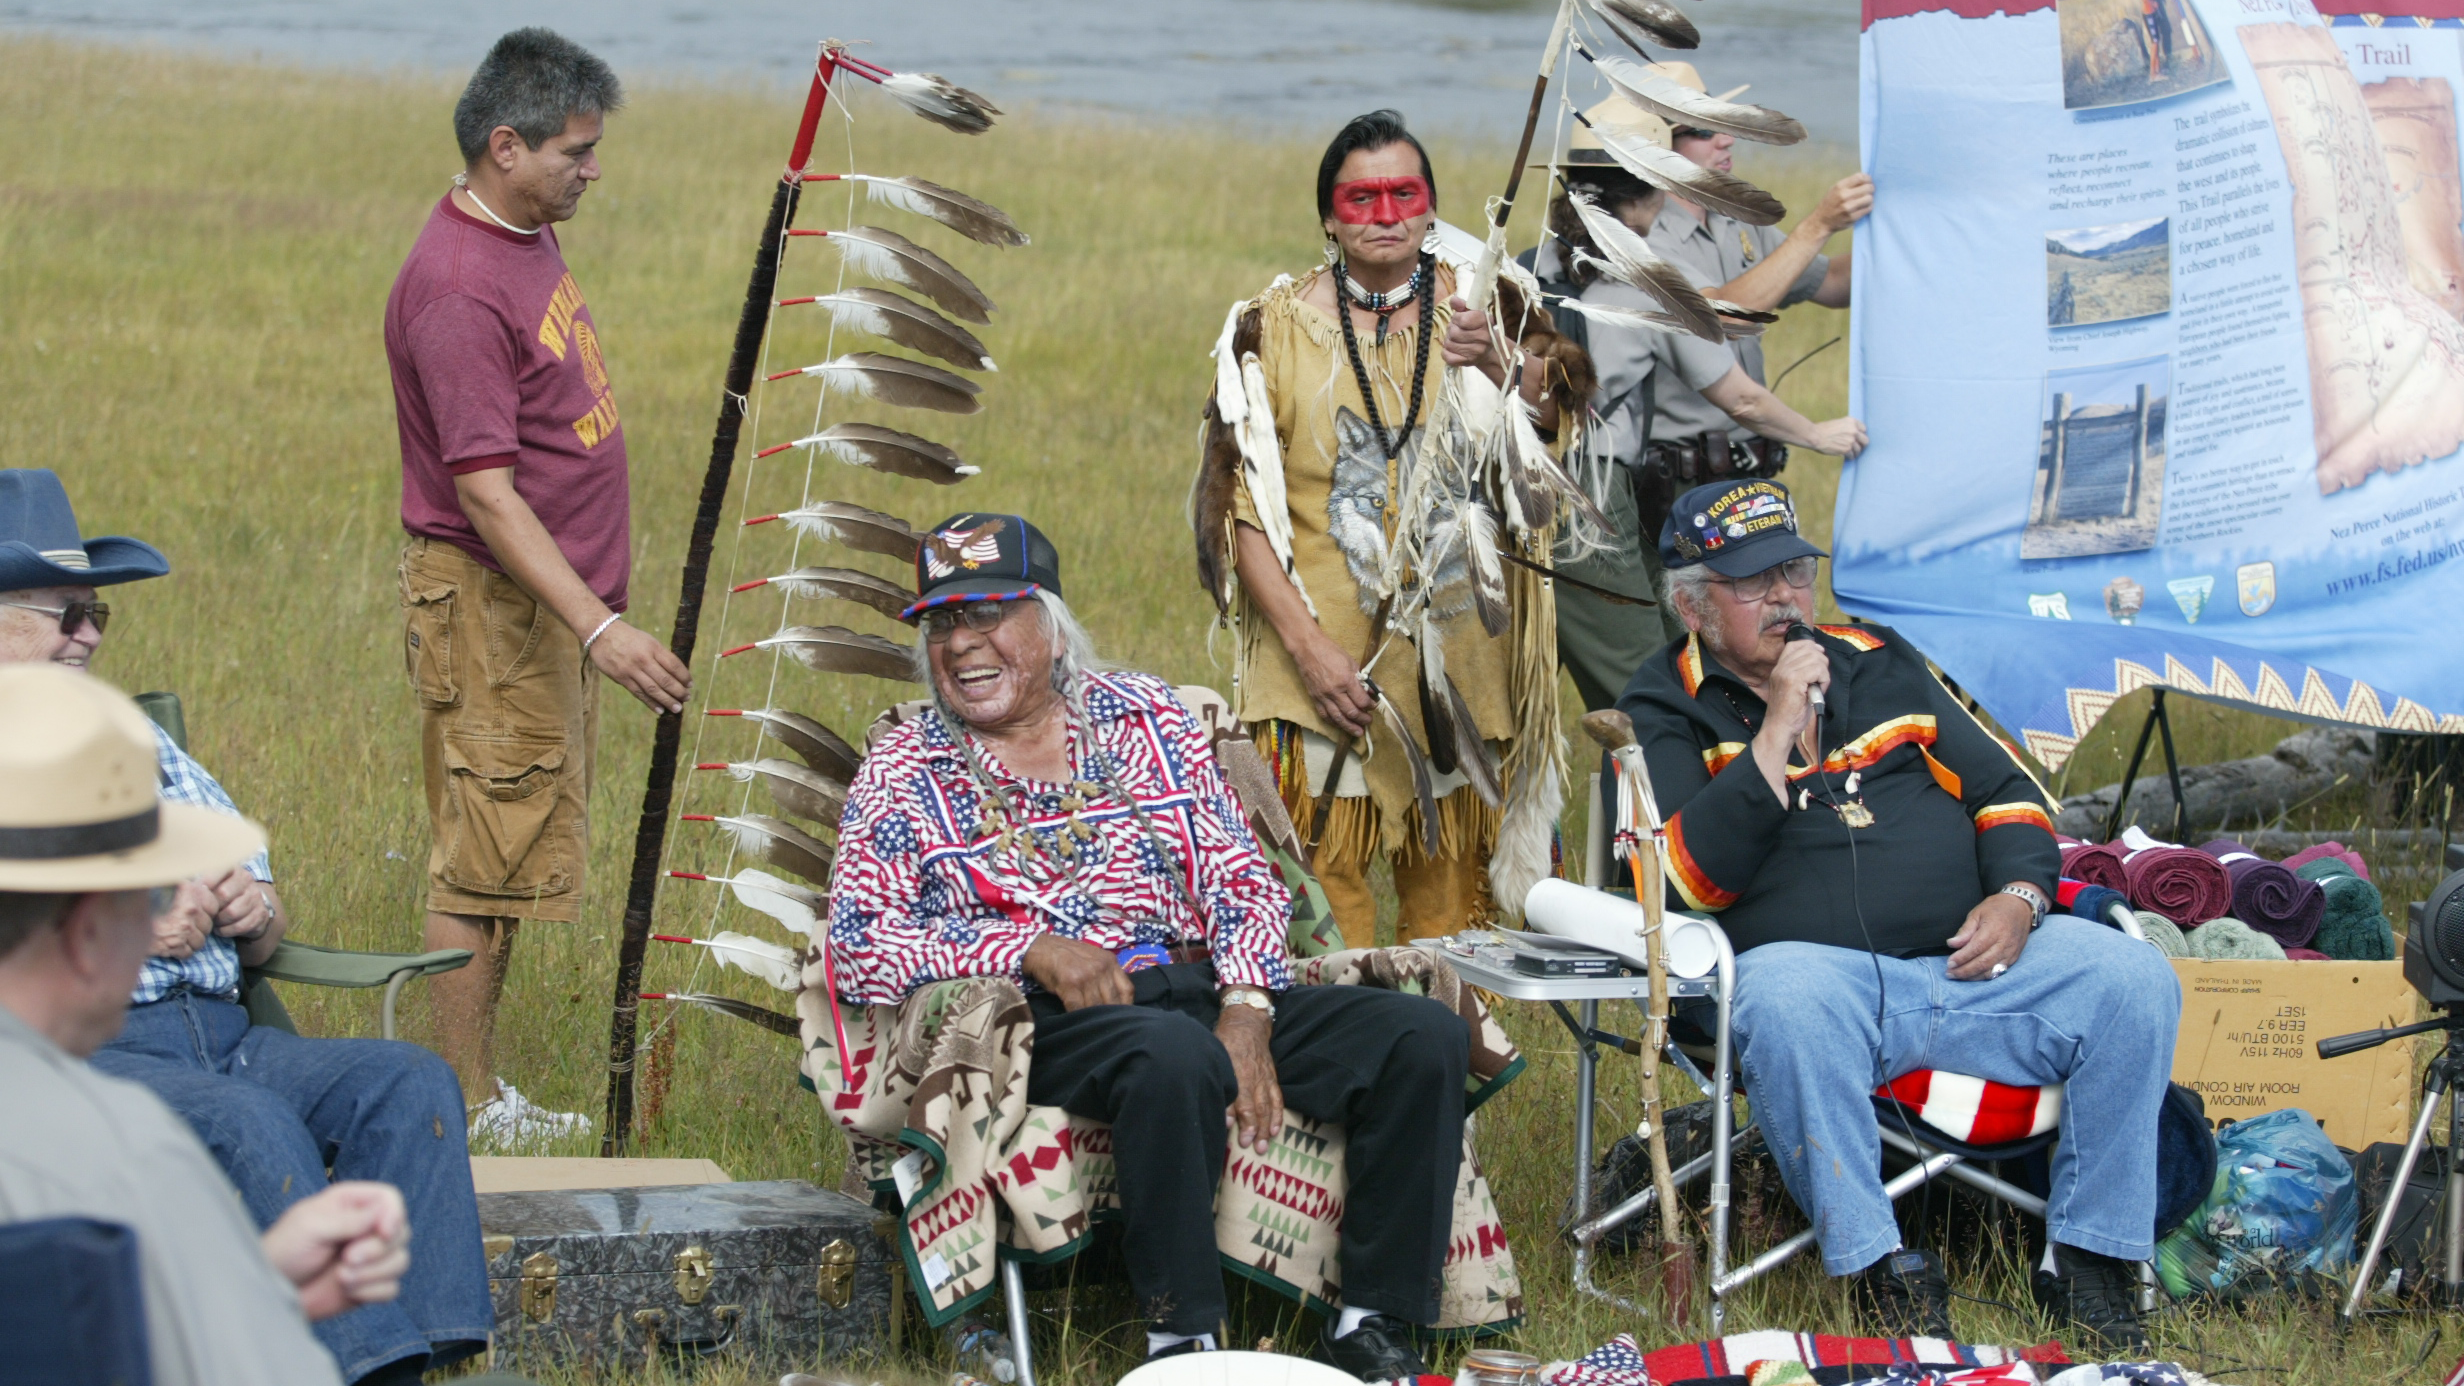 Nez Perce tribe members and NPS Rangers sit together during a commemoration of the Nez Perce Trail.